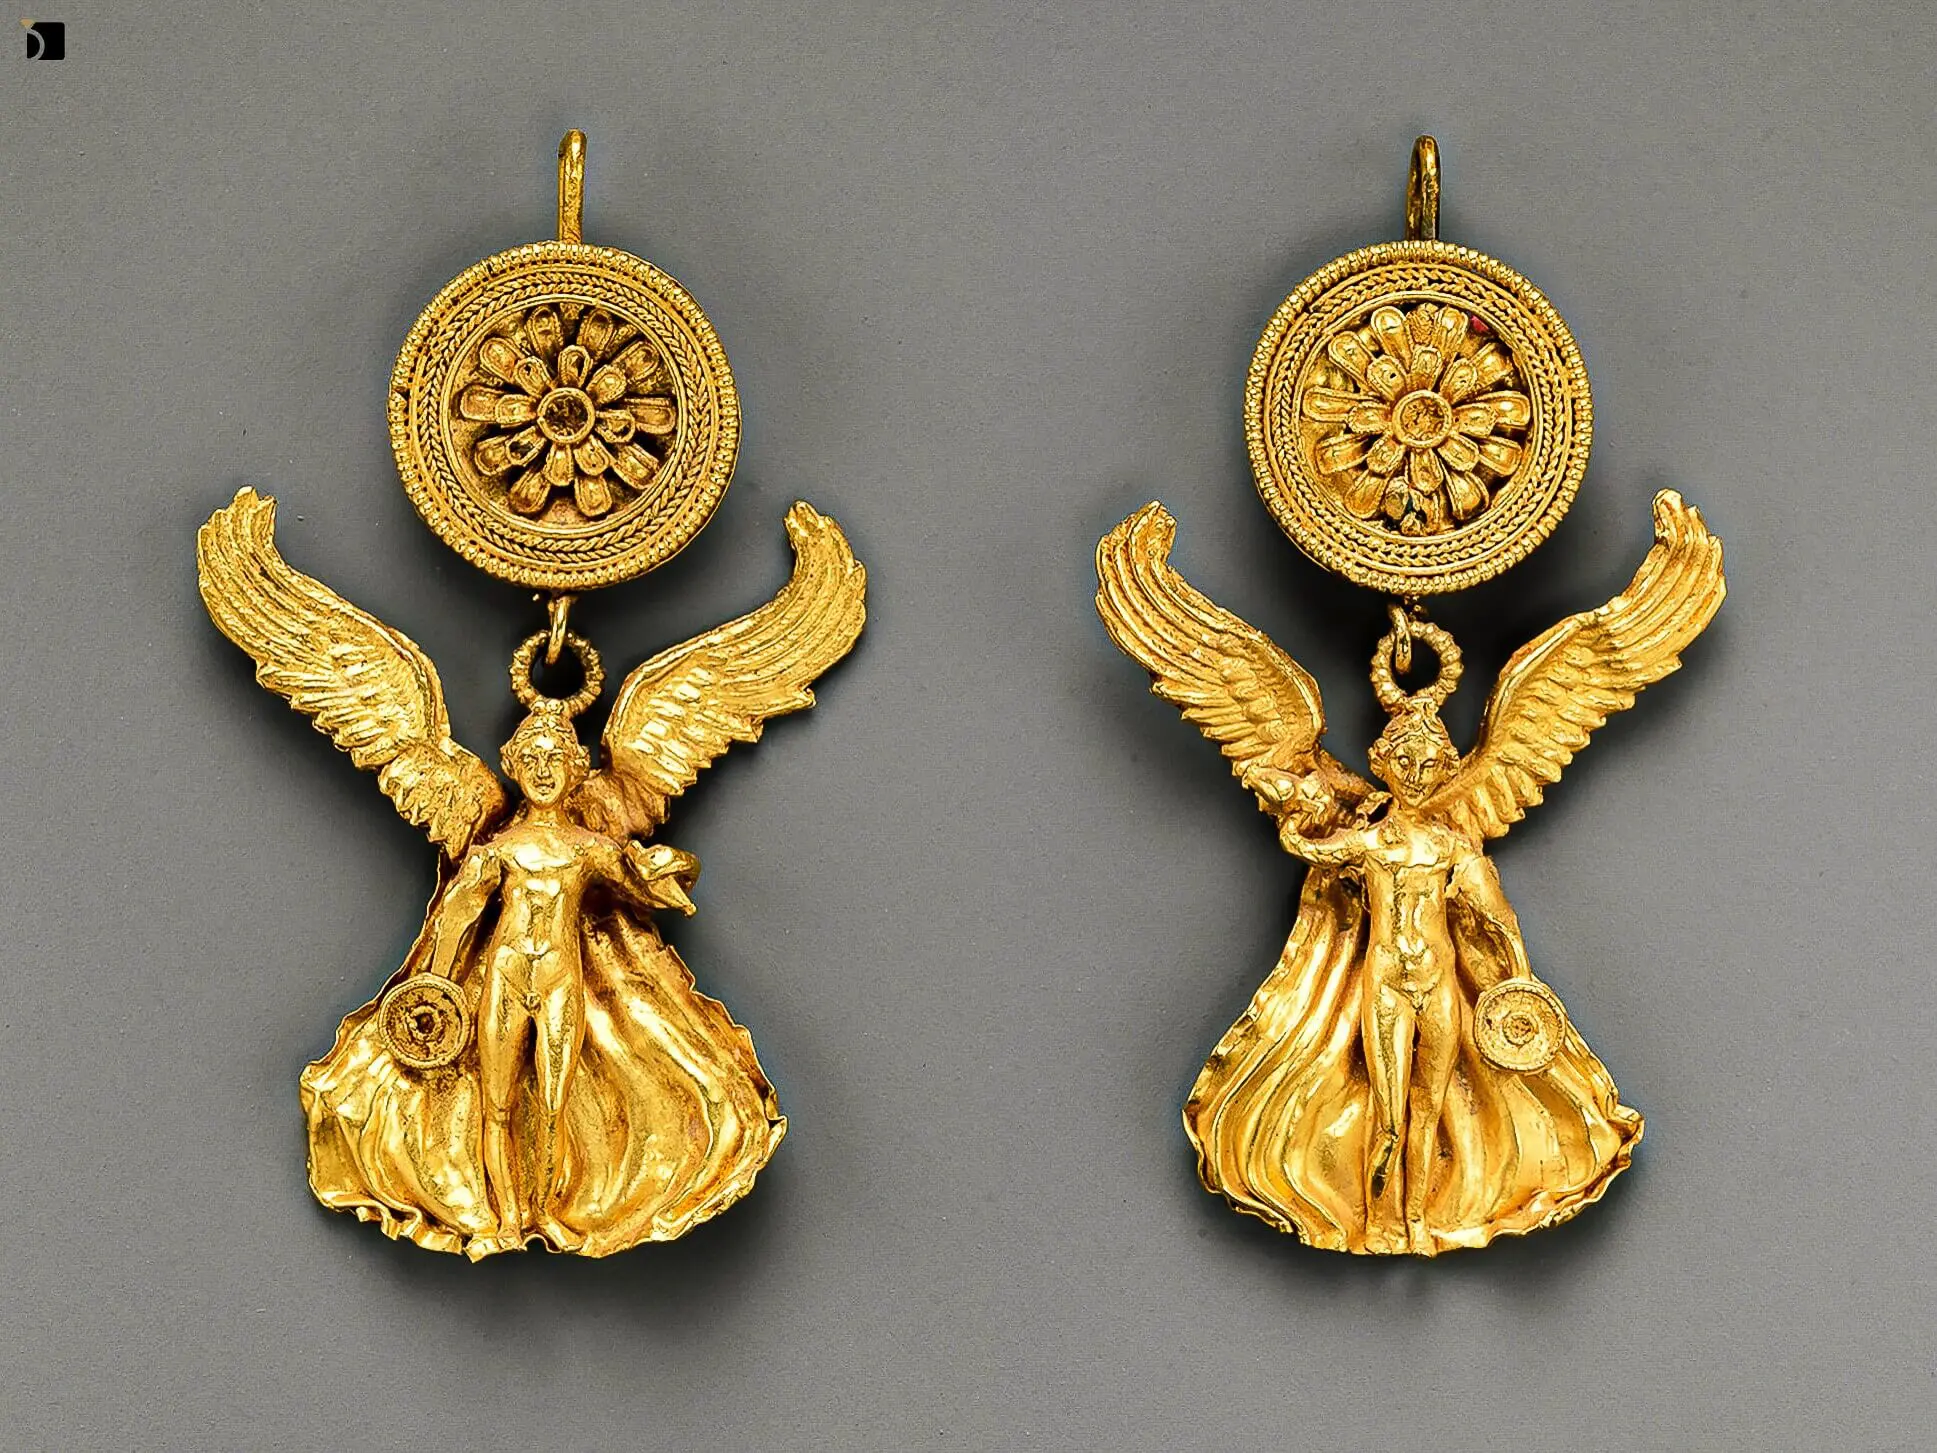 Jewelry In Ancient Greece - A Symbol Of Power, Status, And Beauty